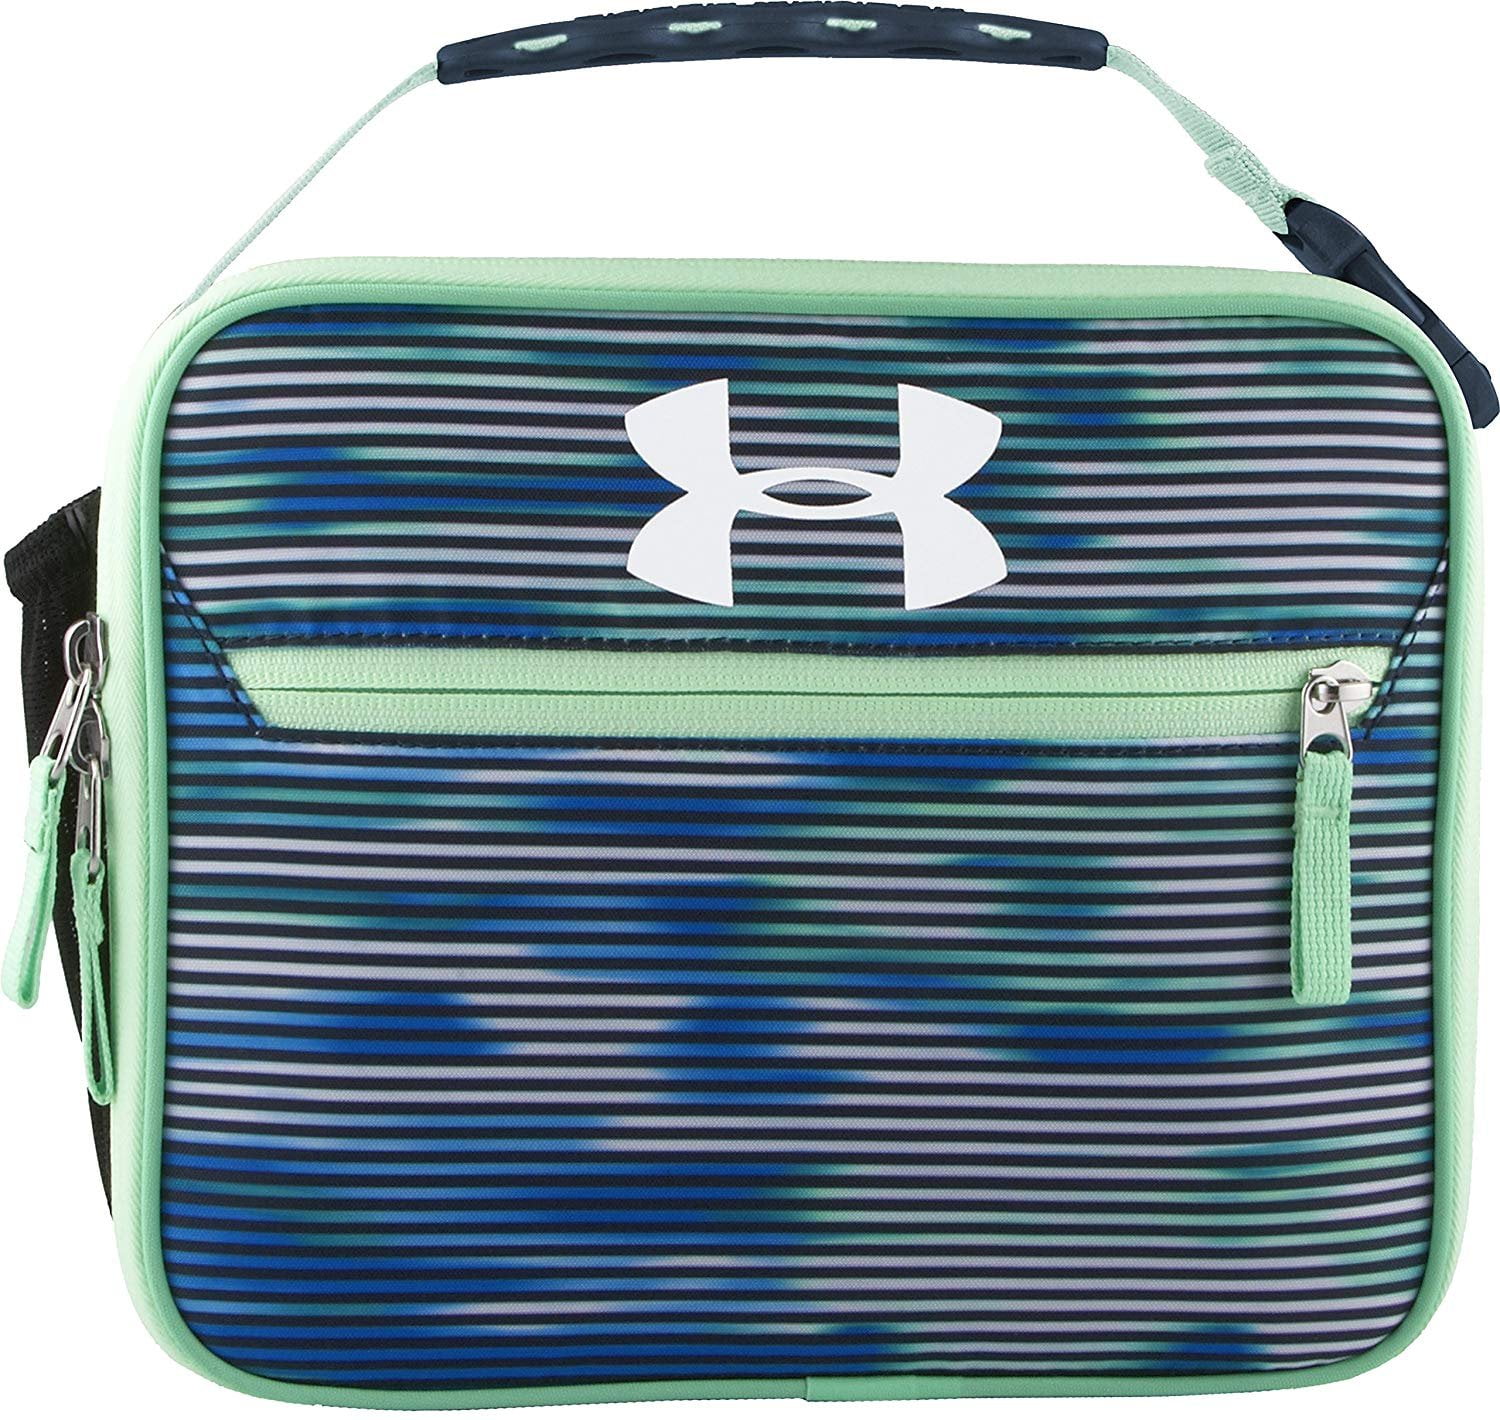 Under Armour Insulated Camouflaged Lunchbox-Back To School Hard Lined 